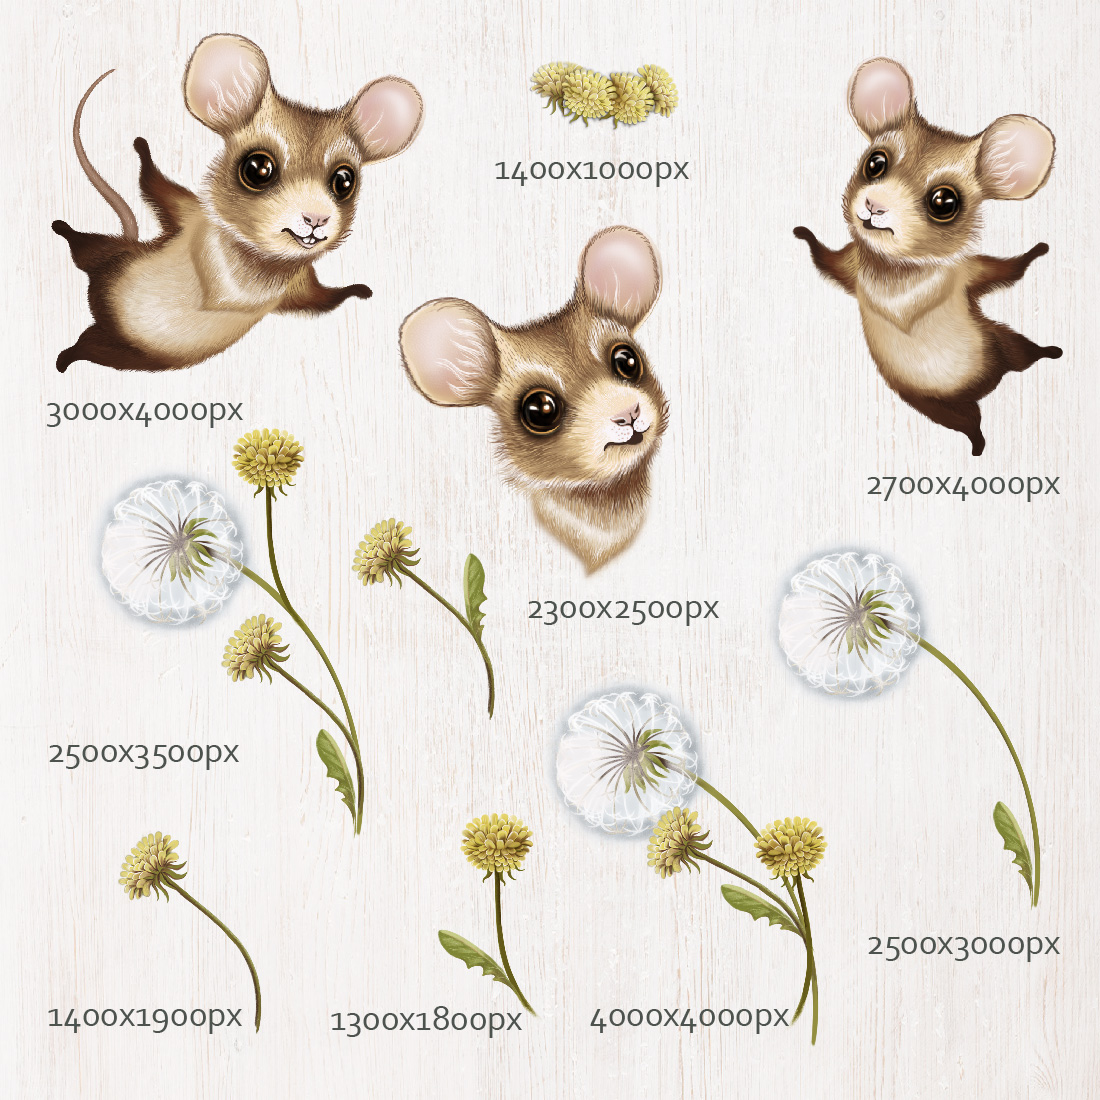 Cute Cartoon Little Mouse with Flowers elements.